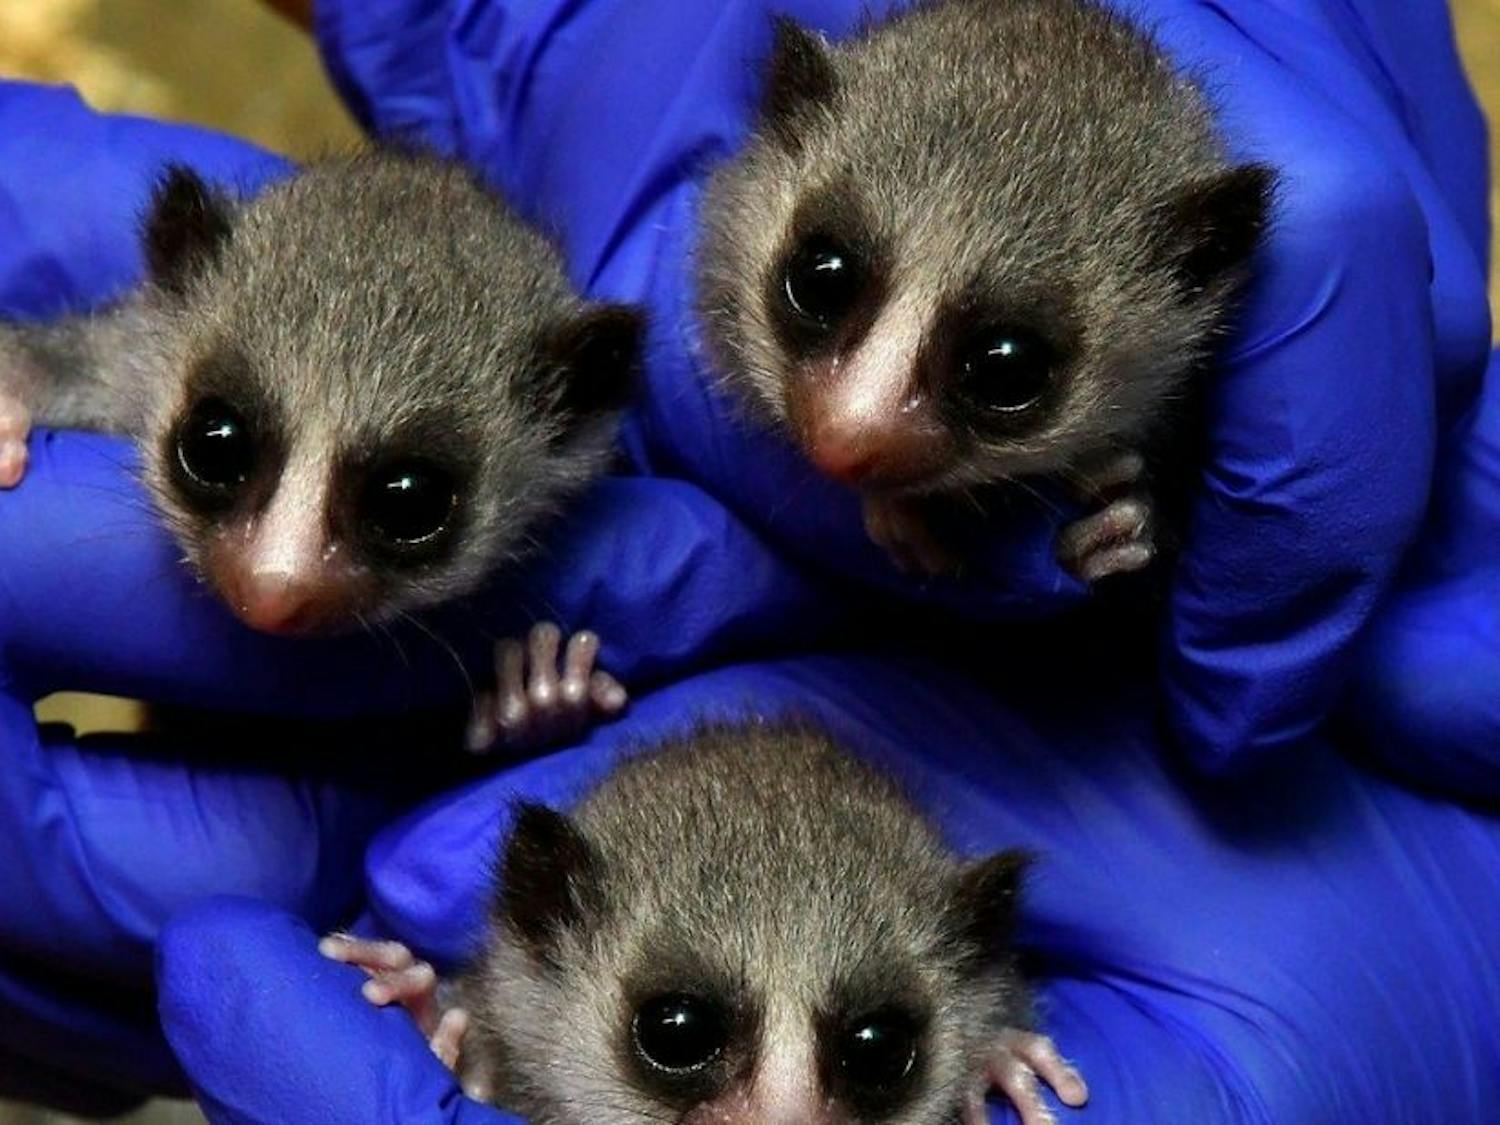 The lemur triplets at 17 days old. Photo by David Haring. Courtesy of the Duke Lemur Center.